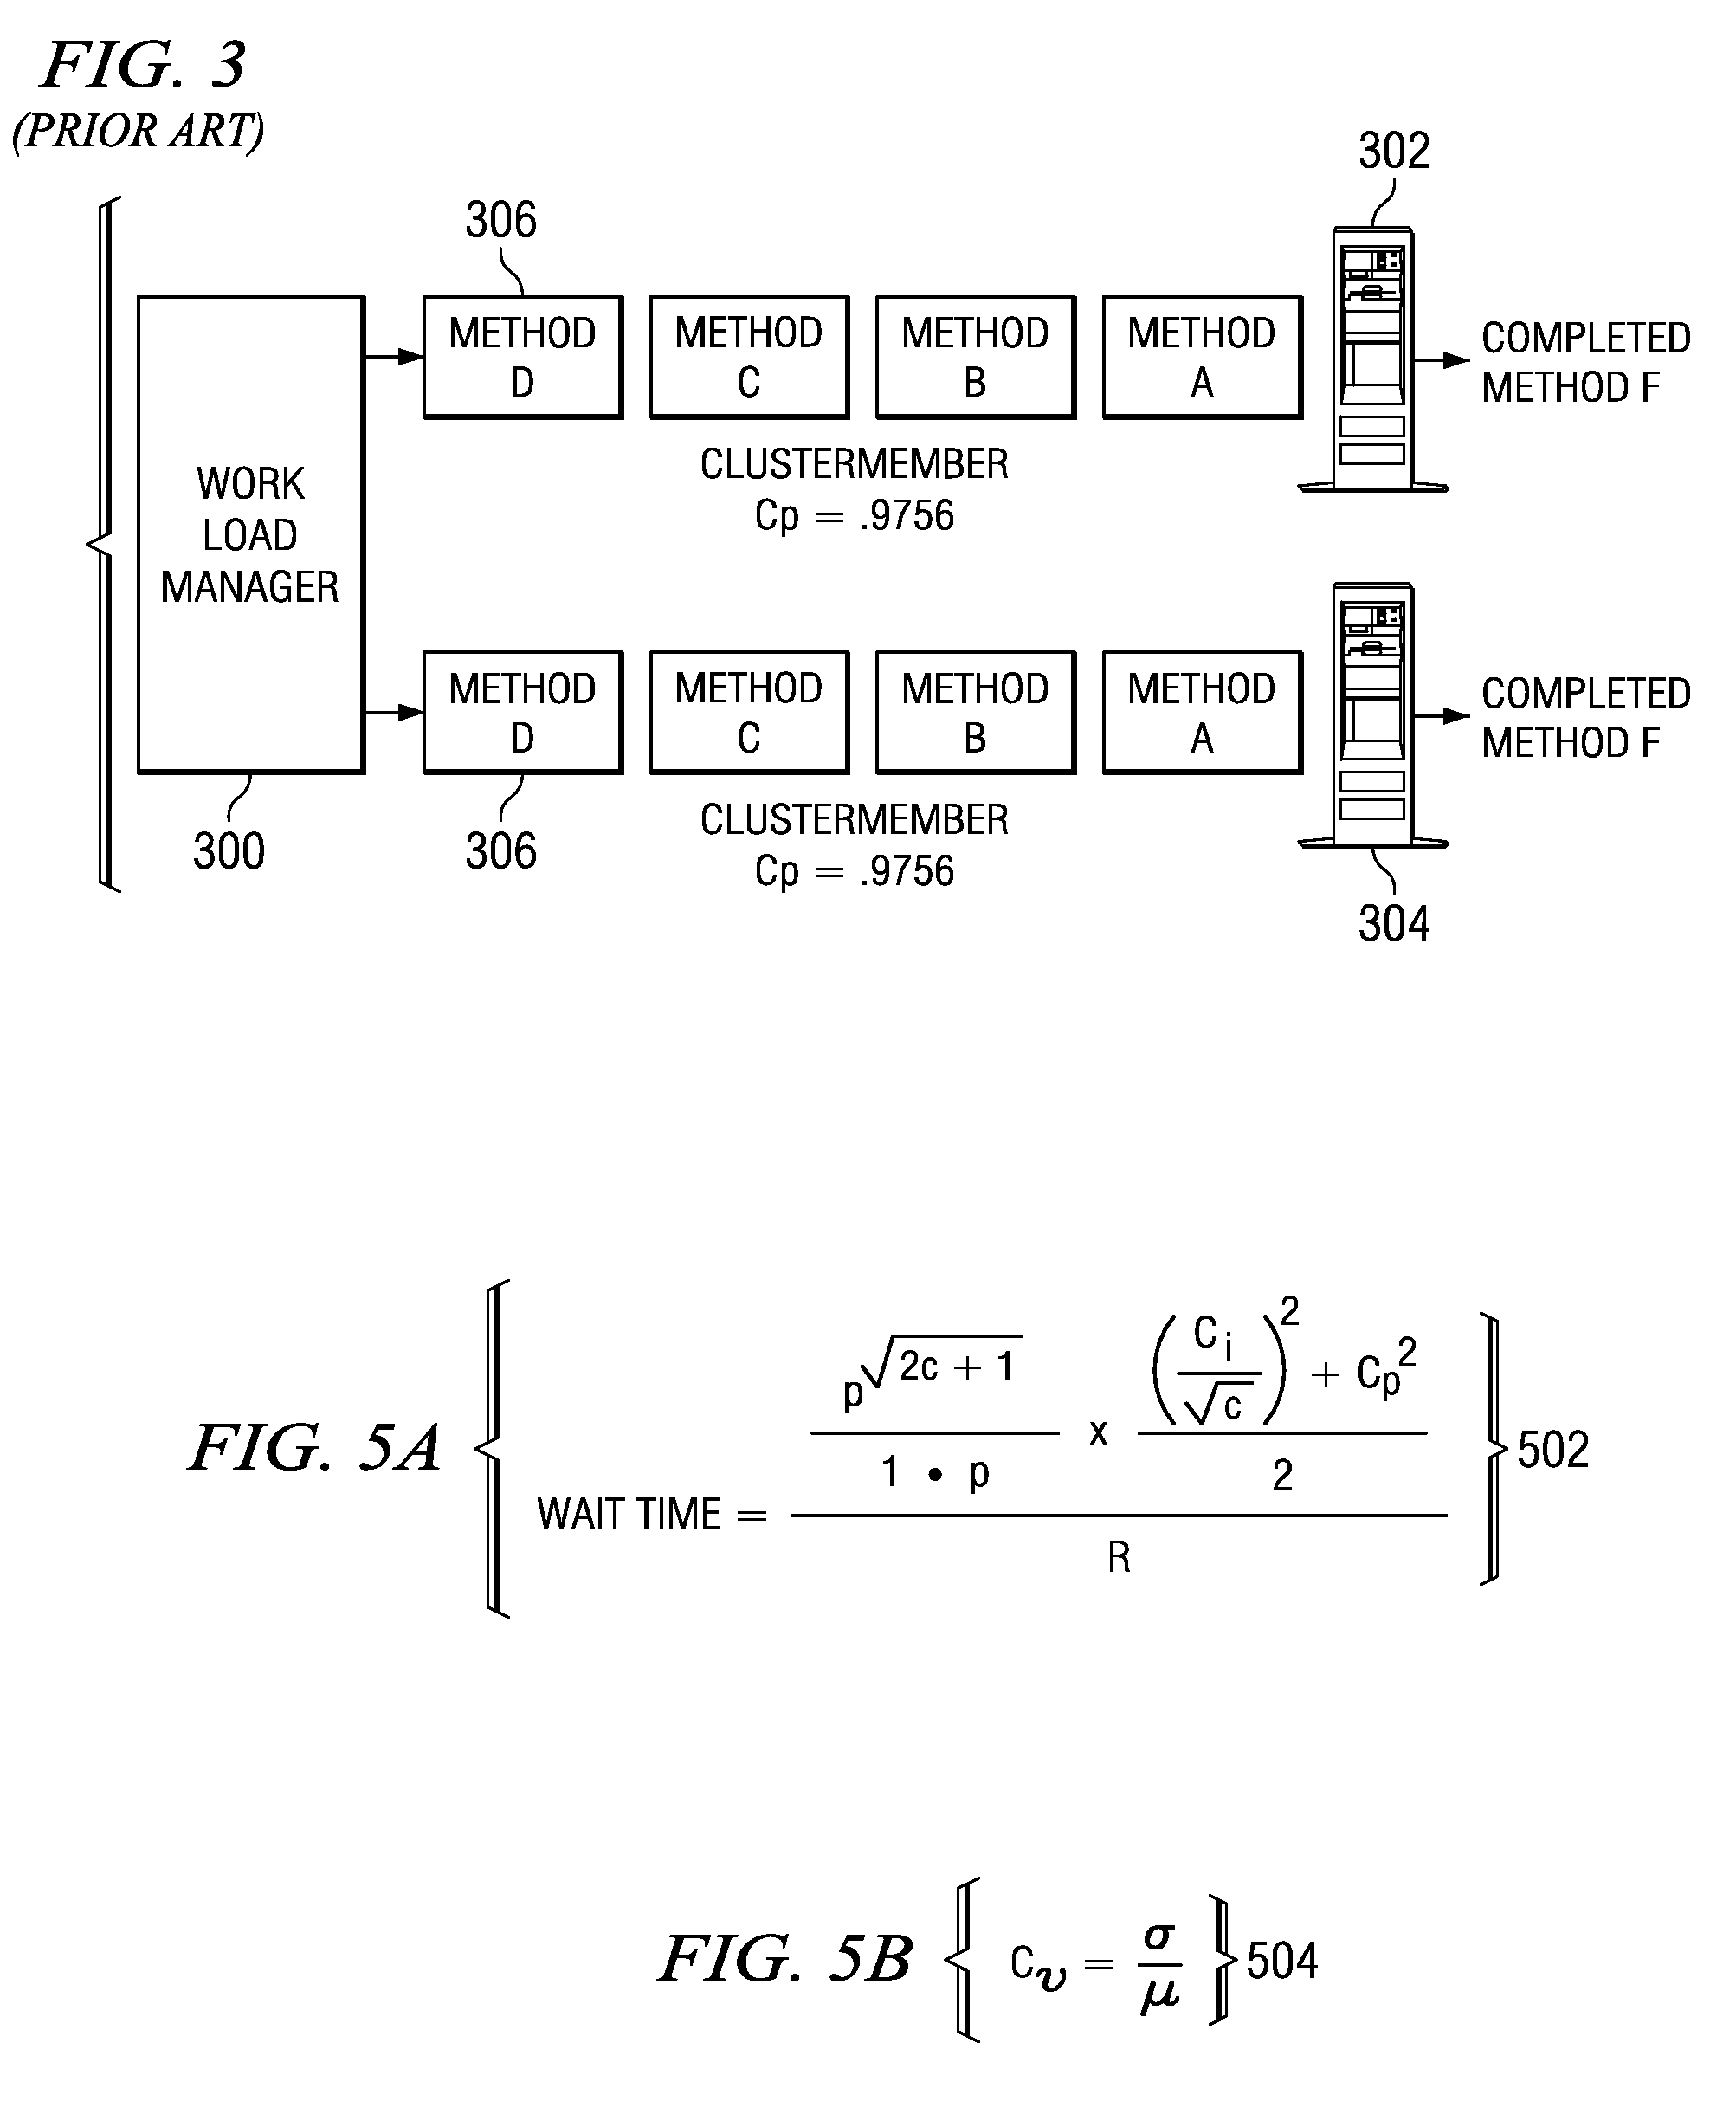 Method and apparatus for improving cluster performance through minimization of method variation